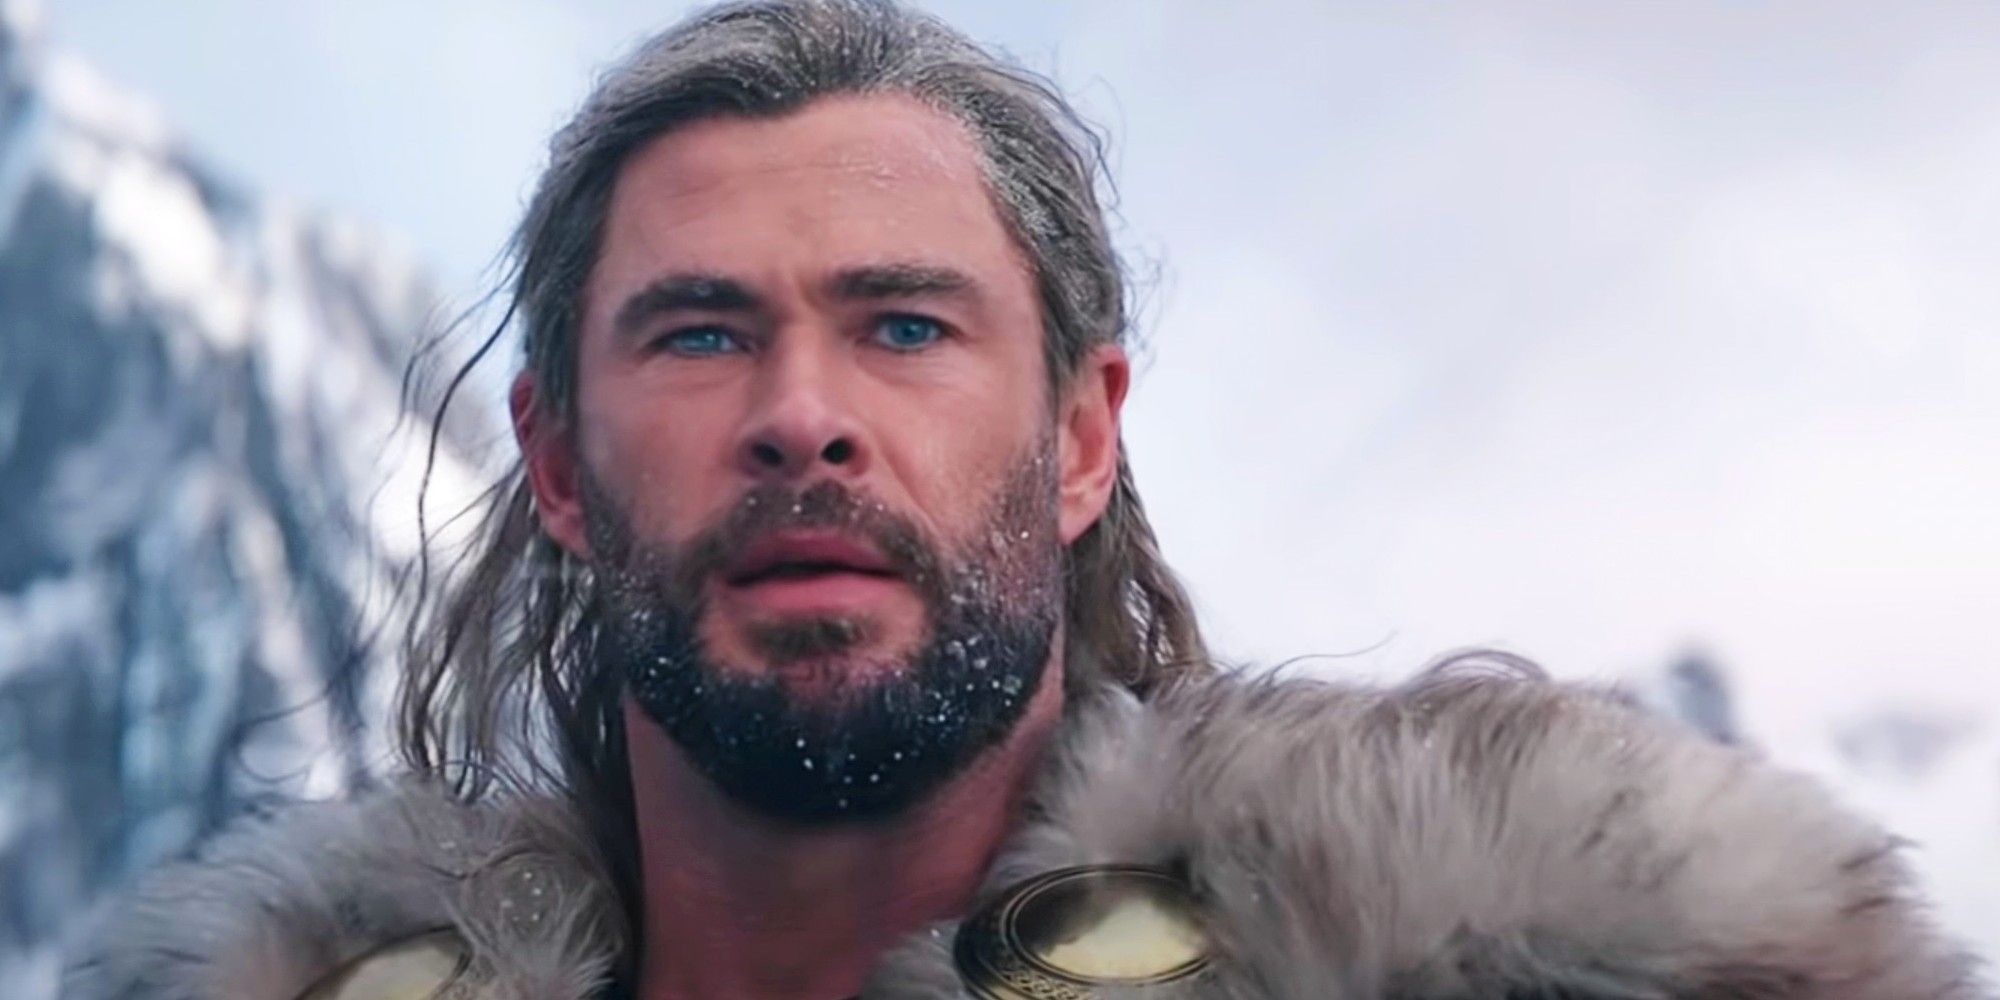 Chris Hemsworth as Thor in Love and Thunder